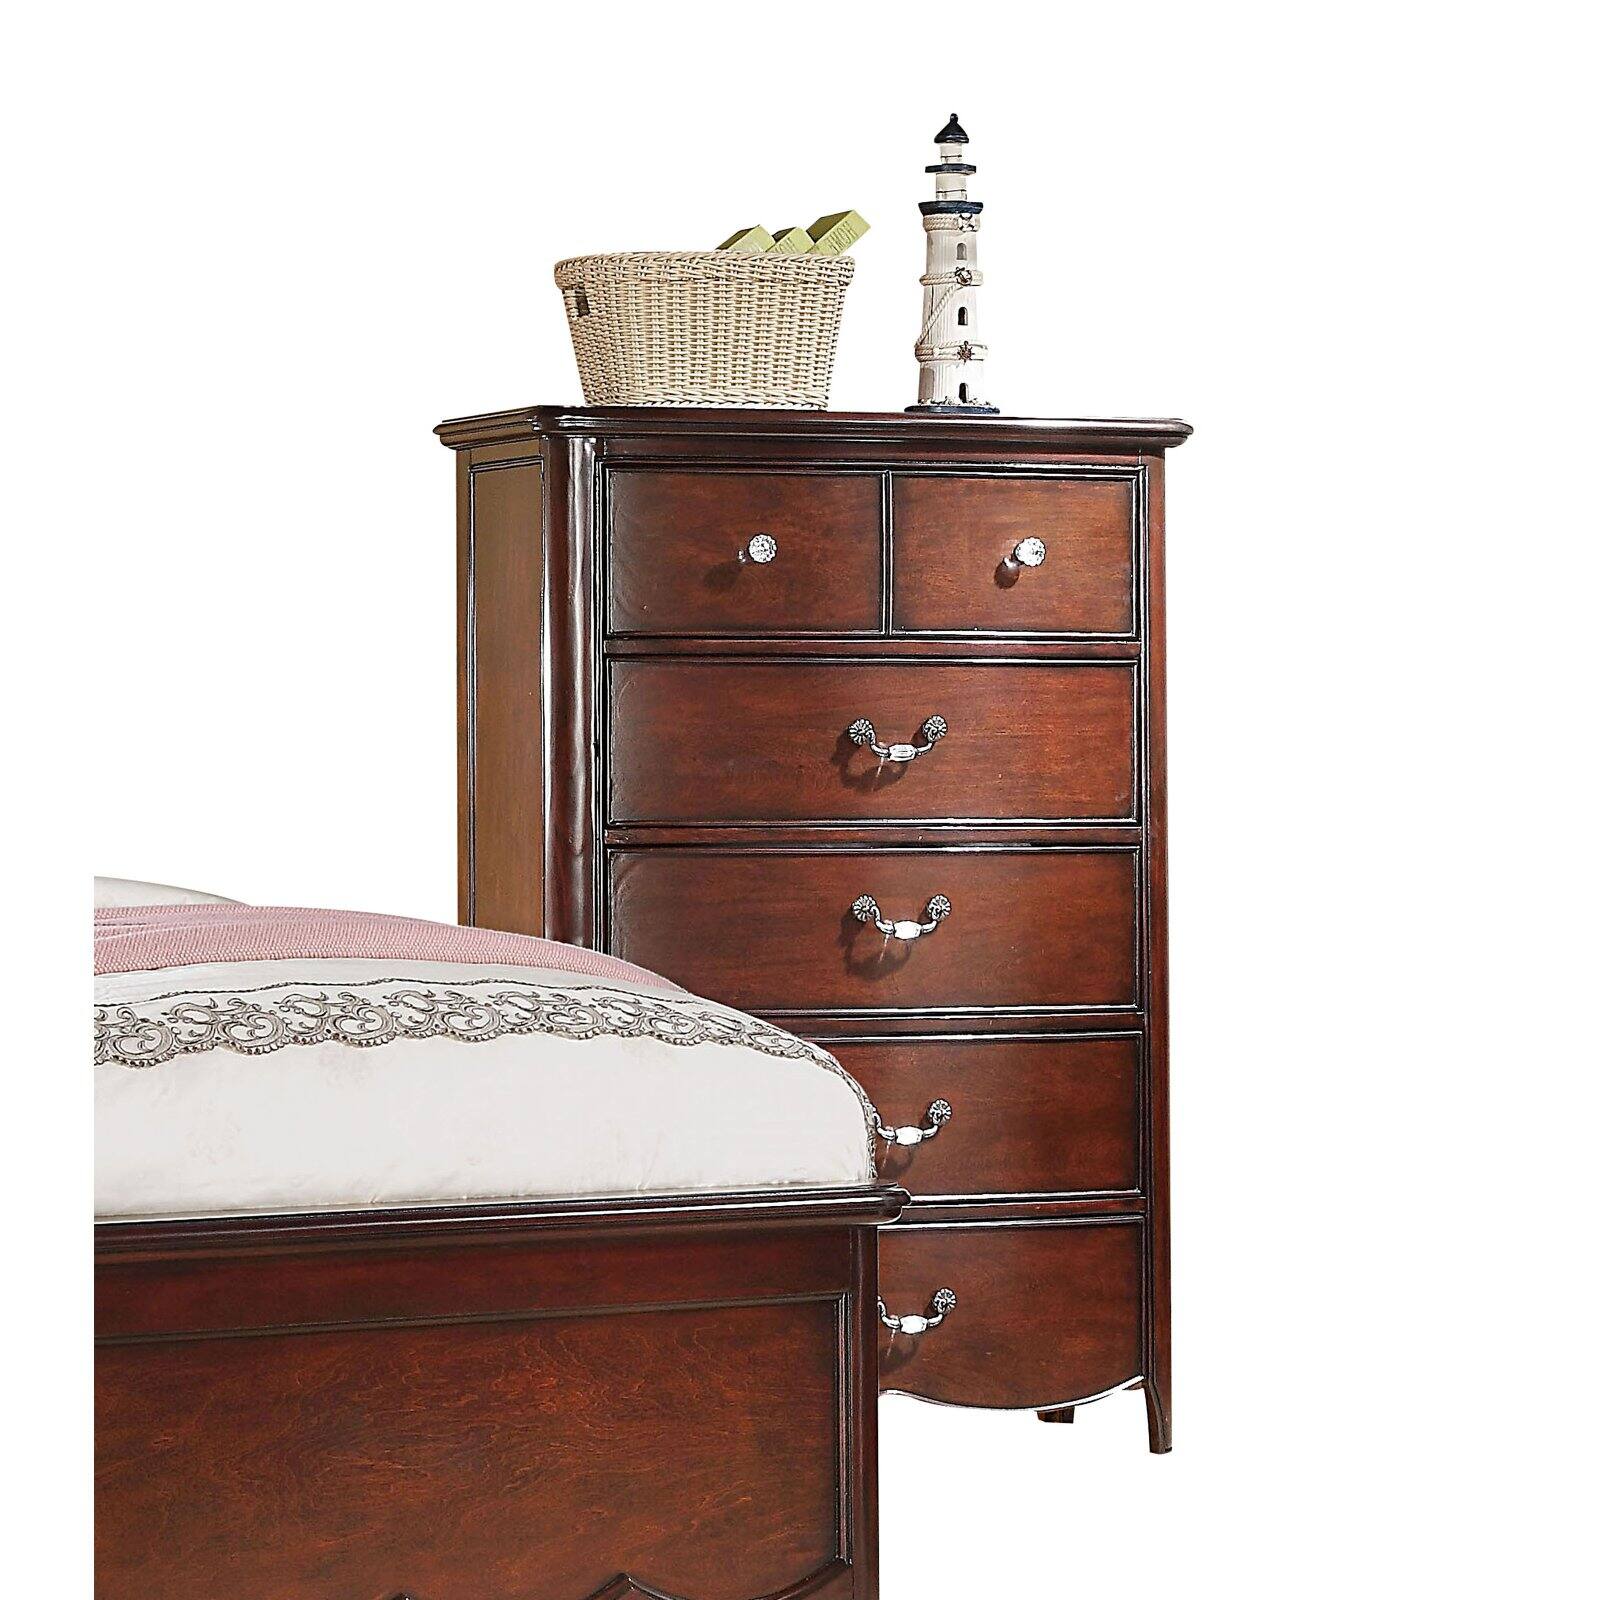 Acme Furniture Cecilie Cherry Chest with Six Drawers - image 2 of 2